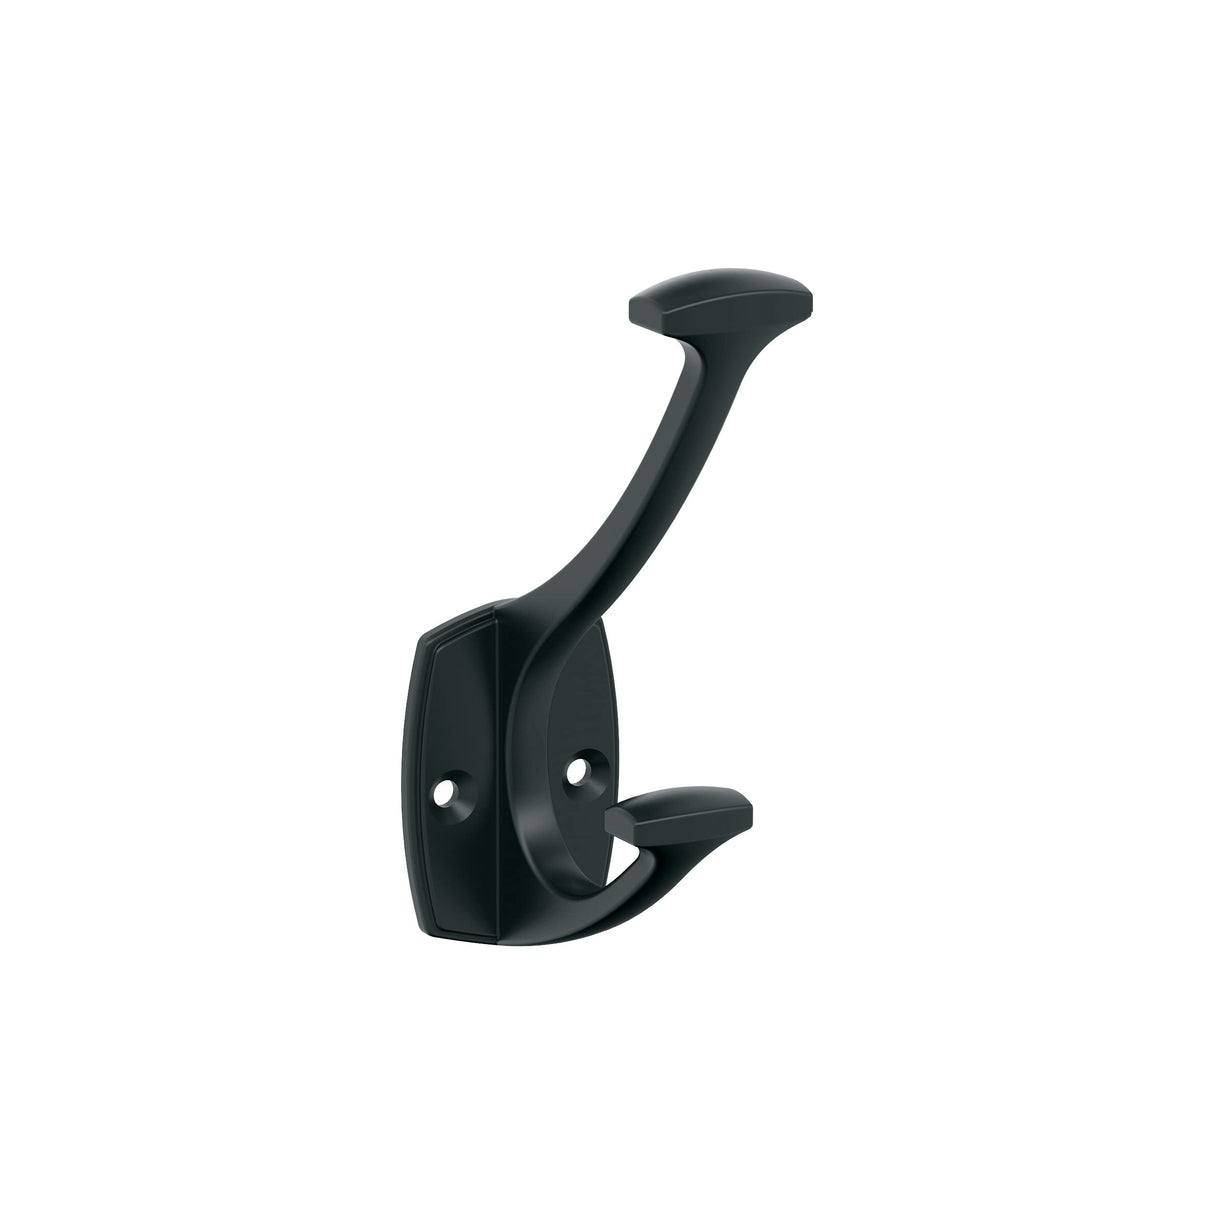 Amerock H37001MB Vicinity Double Prong Decorative Wall Hook Matte Black Hook for Coats, Hats, Backpacks, Bags Hooks for Bathroom, Bedroom, Closet, Entryway, Laundry Room, Office